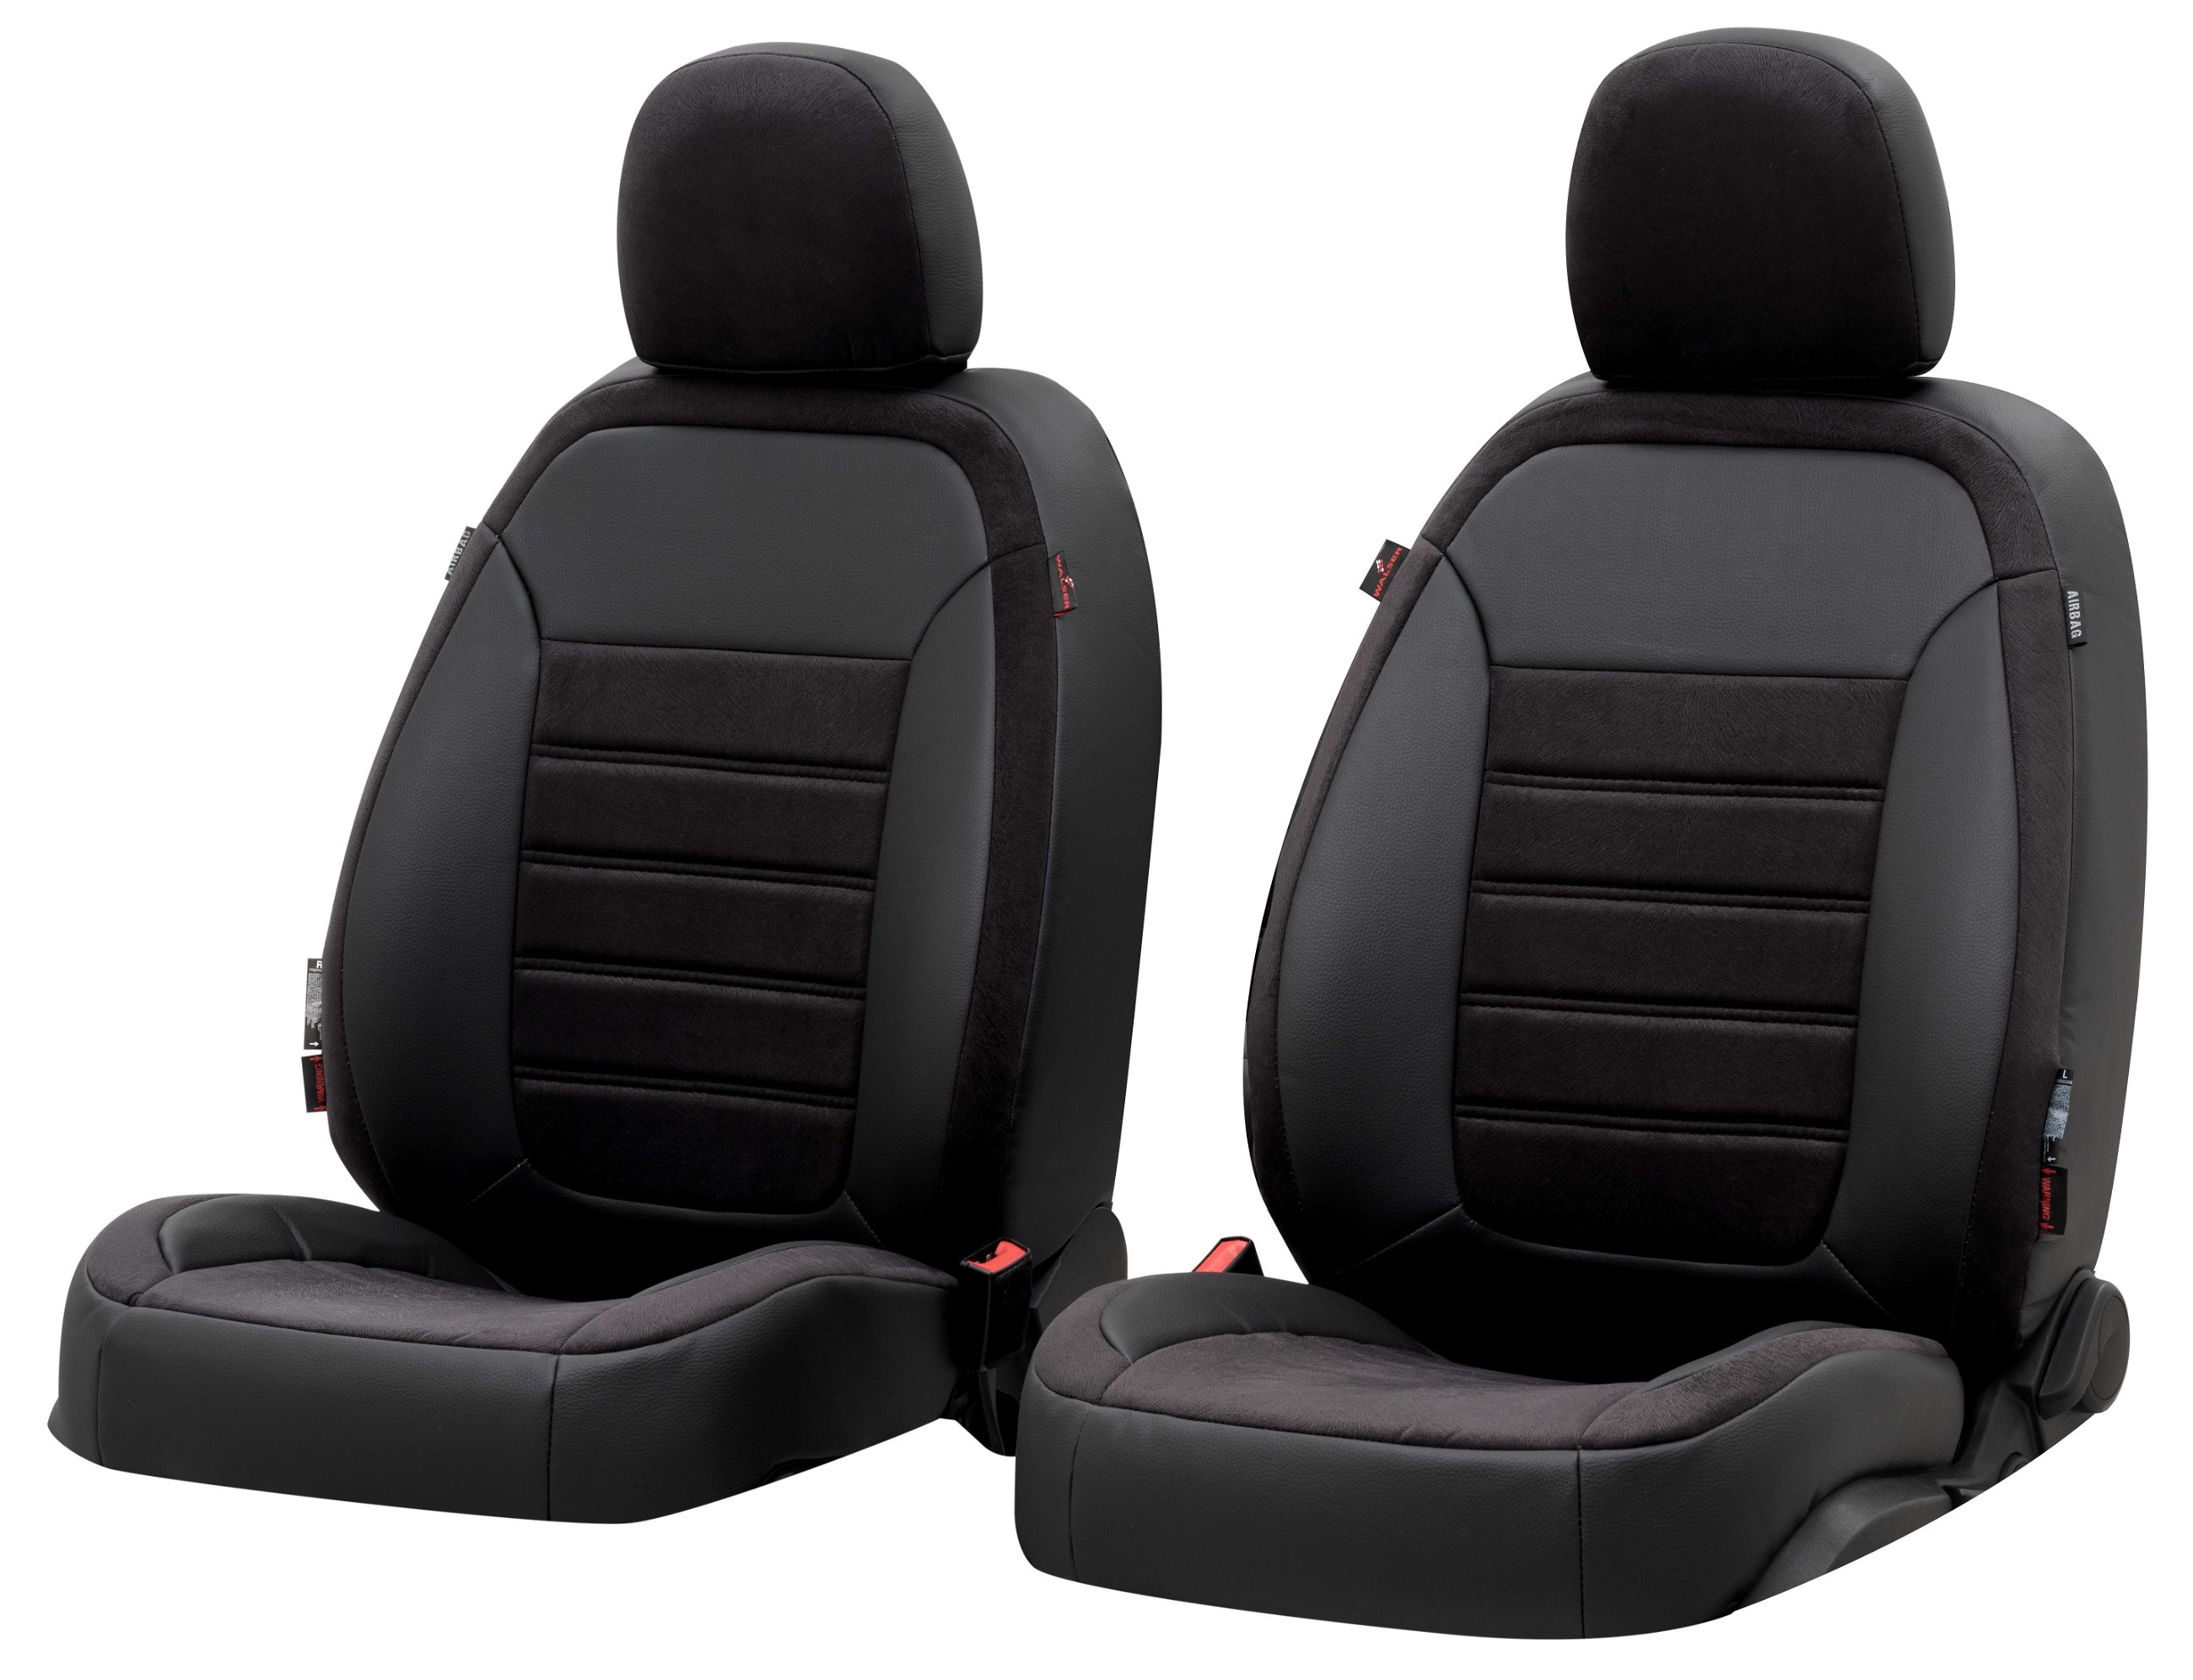 Seat Cover Bari for VW Golf VIII 07/2019-Today, 2 single seat cover for normal seats